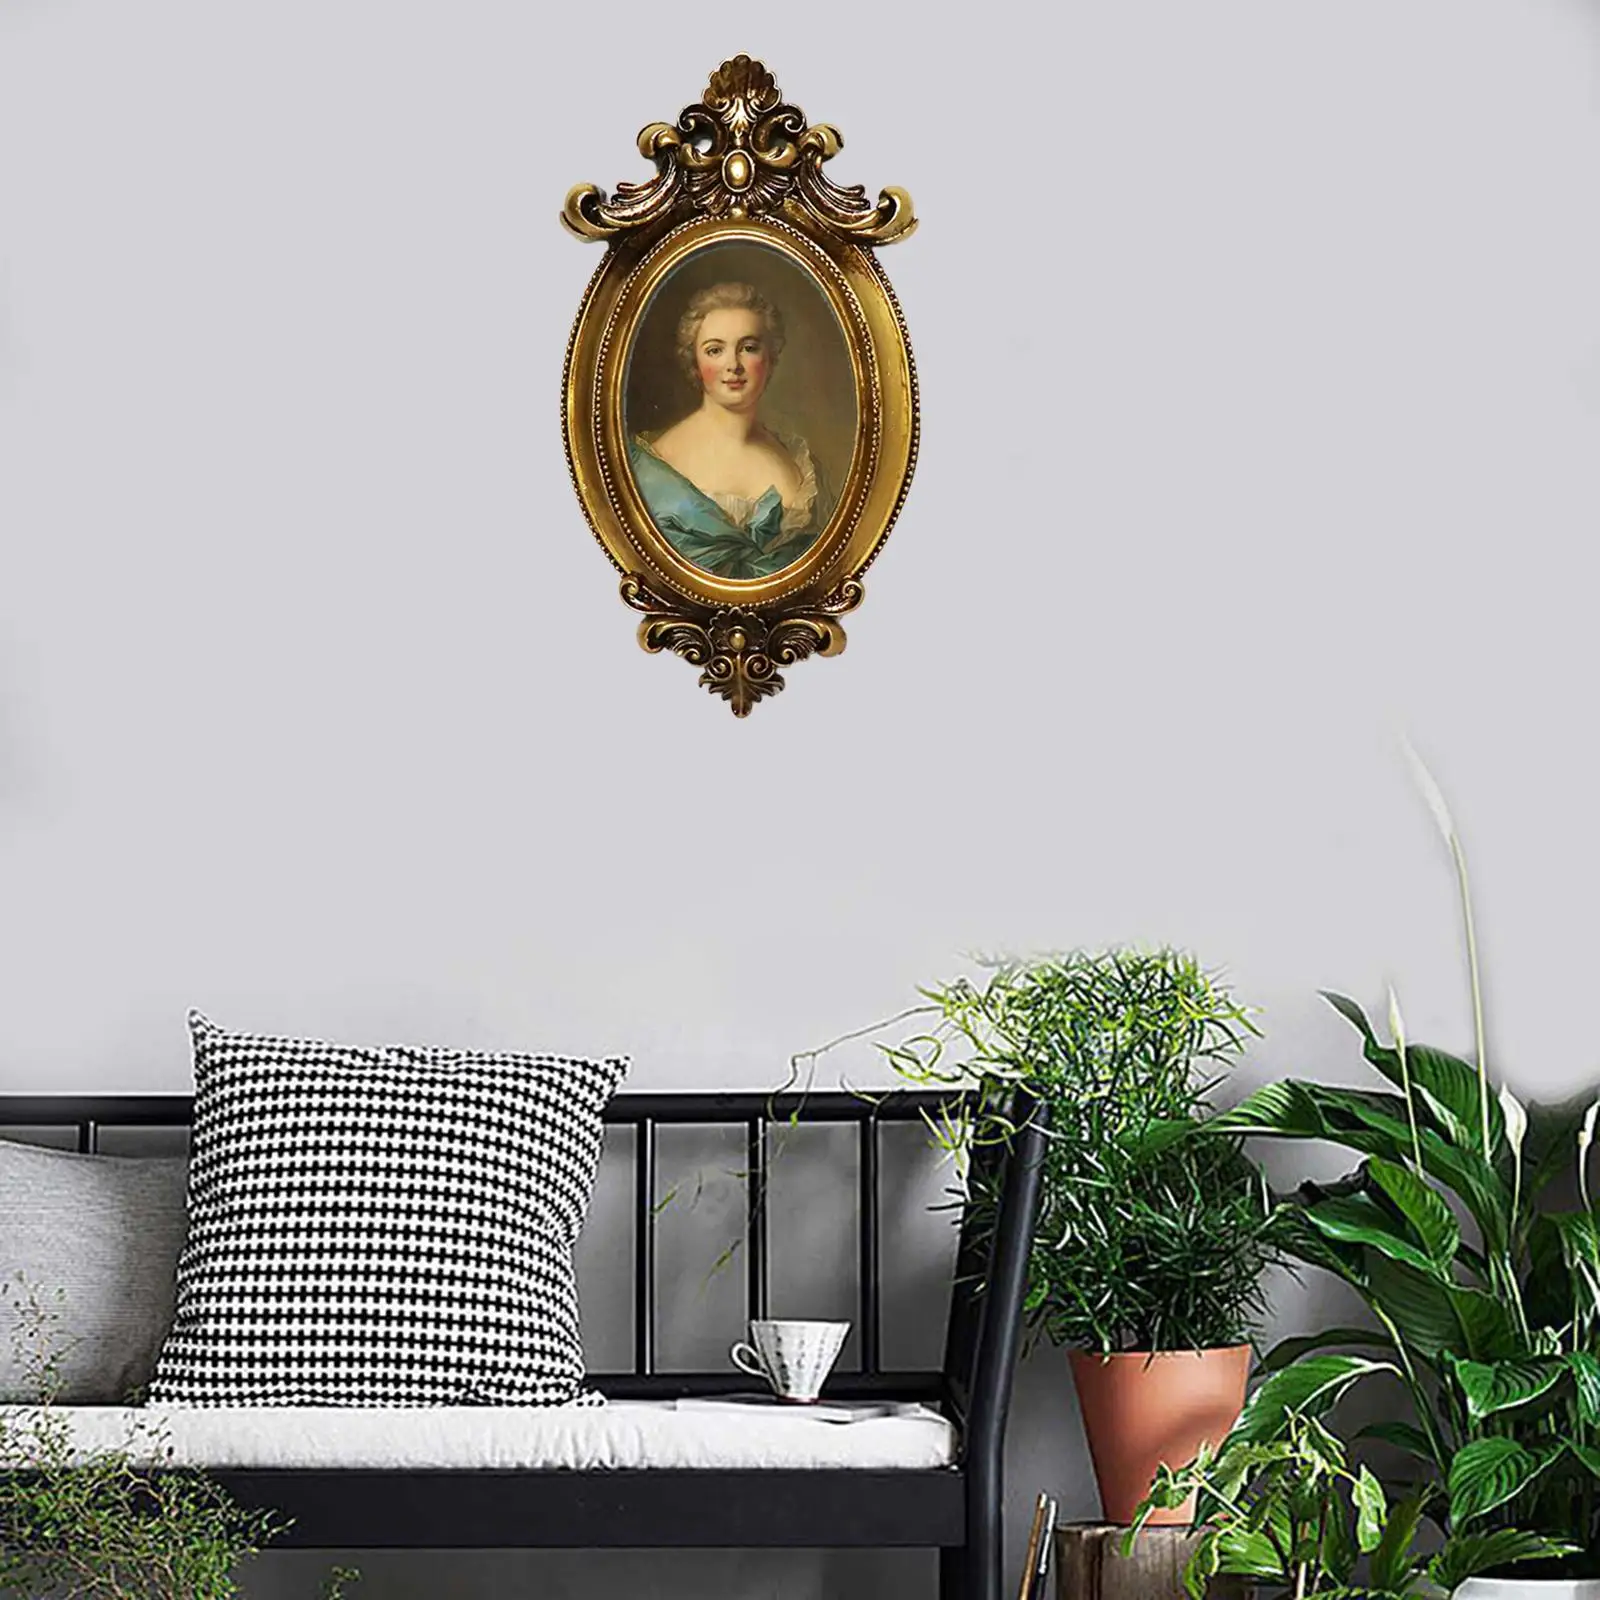 European Antique Oval Resin Photo Frame Creative Photo Frames Home Decor Old-fashioned Wall-mounted Gold Picture Frame